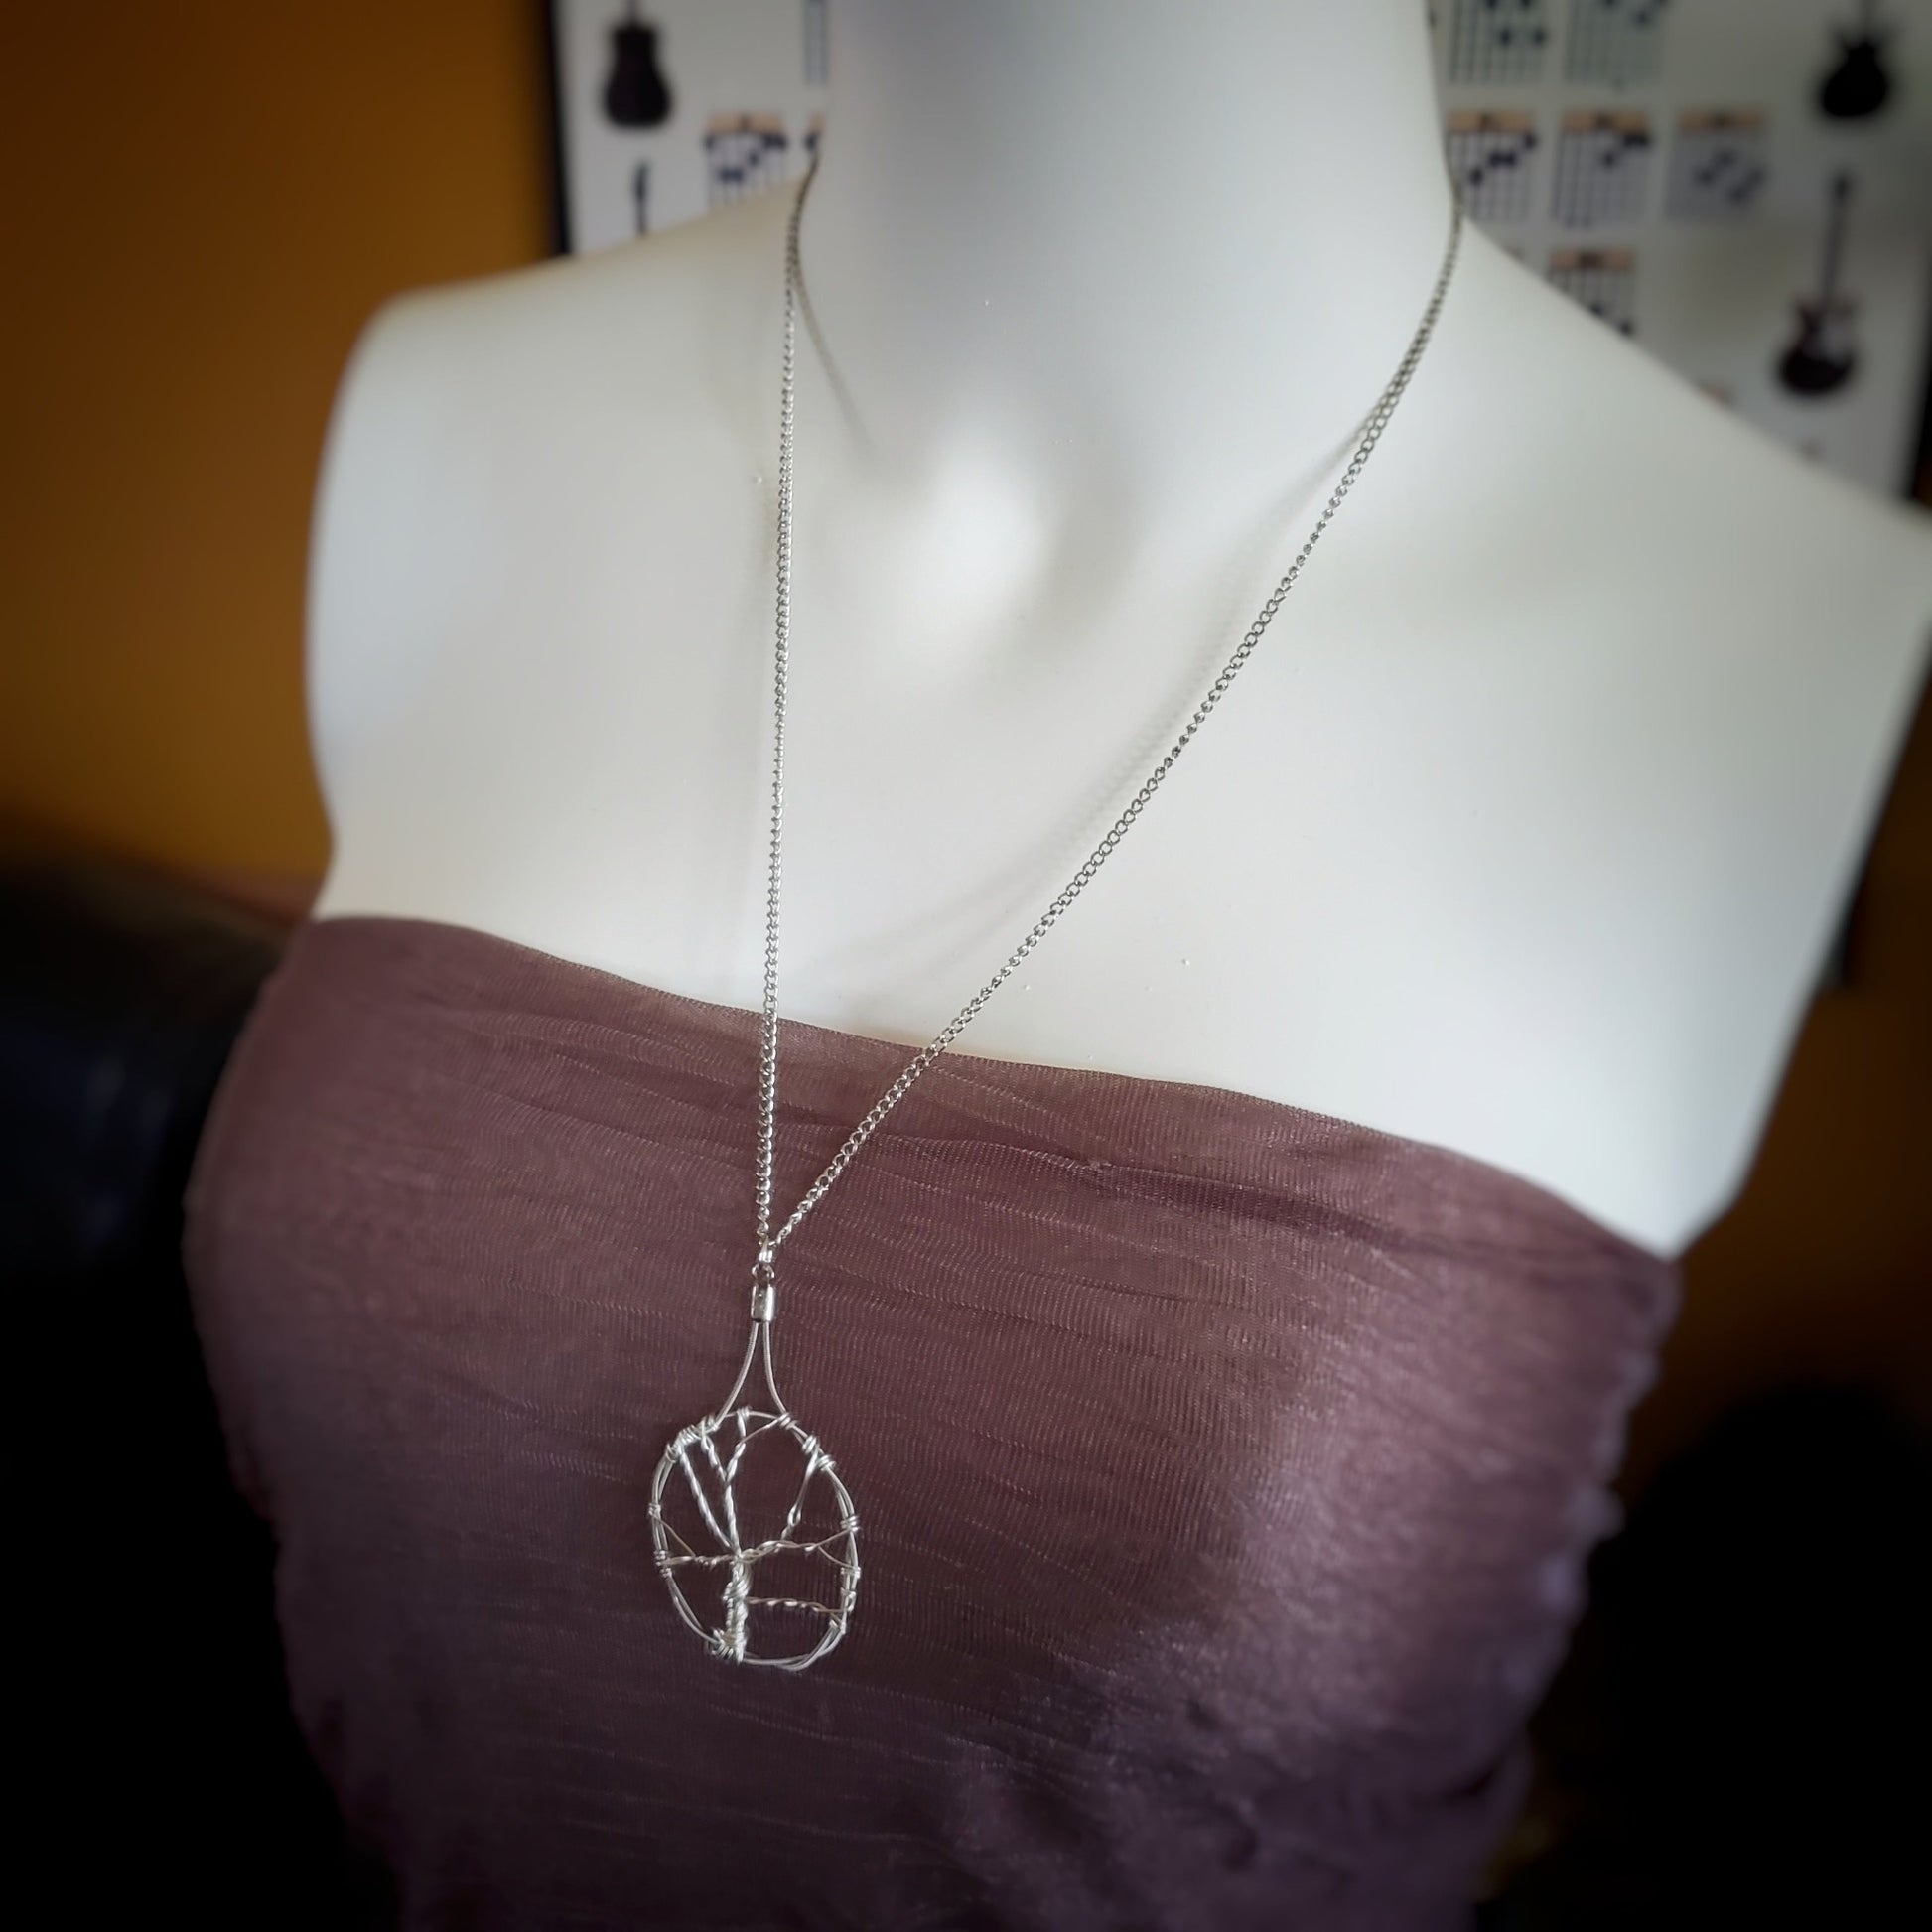 white woman's bust wearing a a necklace made with a chain on which hangs a pendant in the shape of a tree with a circle around it - the tree is made of silver coloured wire and the circle is made from upcycled guitar strings 